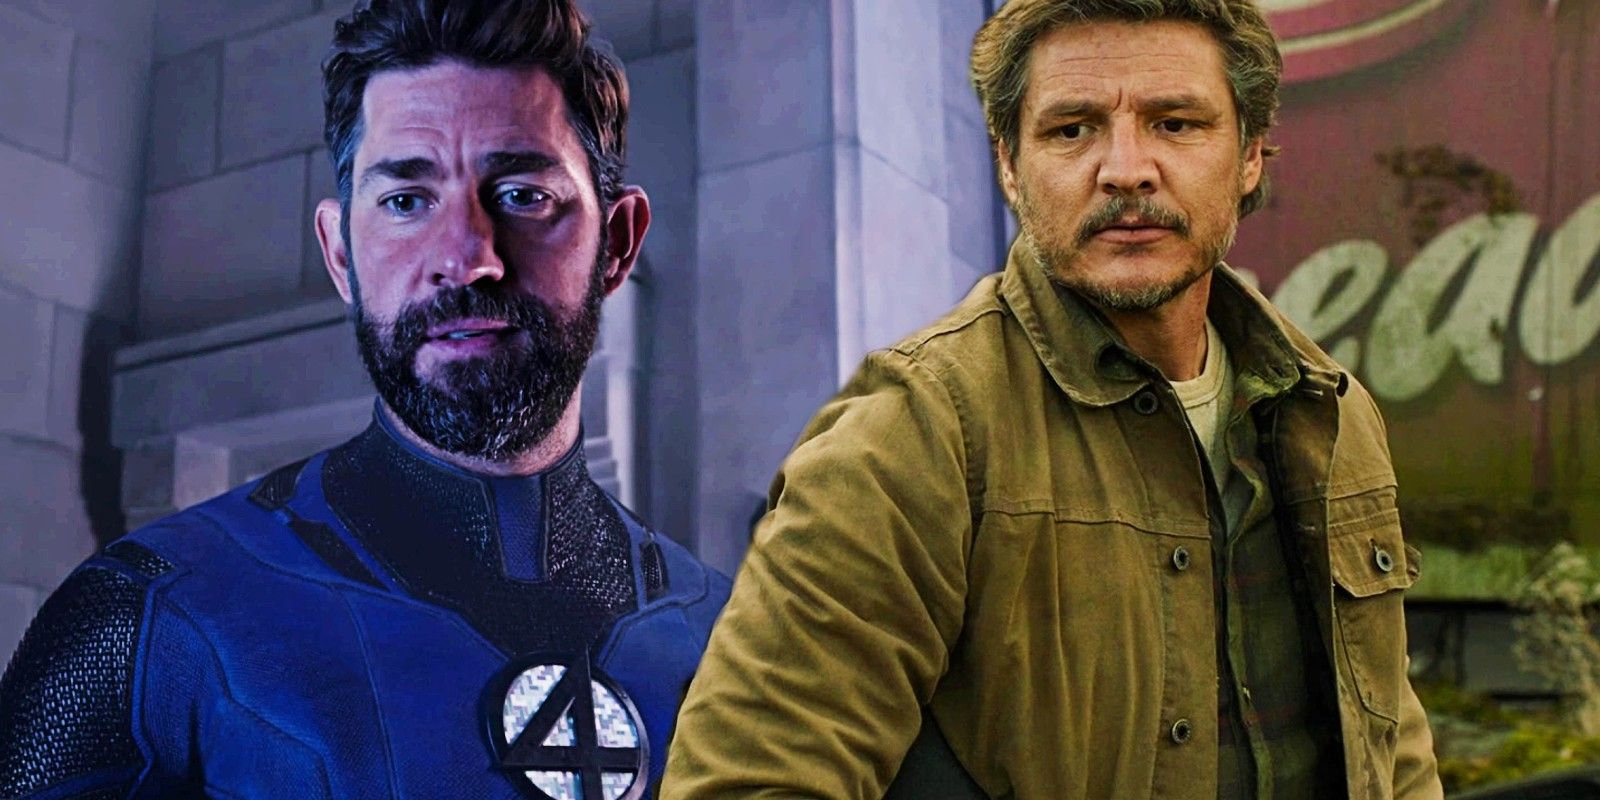 Reed Richards from Doctor Strange in the Multiverse of Madness and Joel from The Last of Us